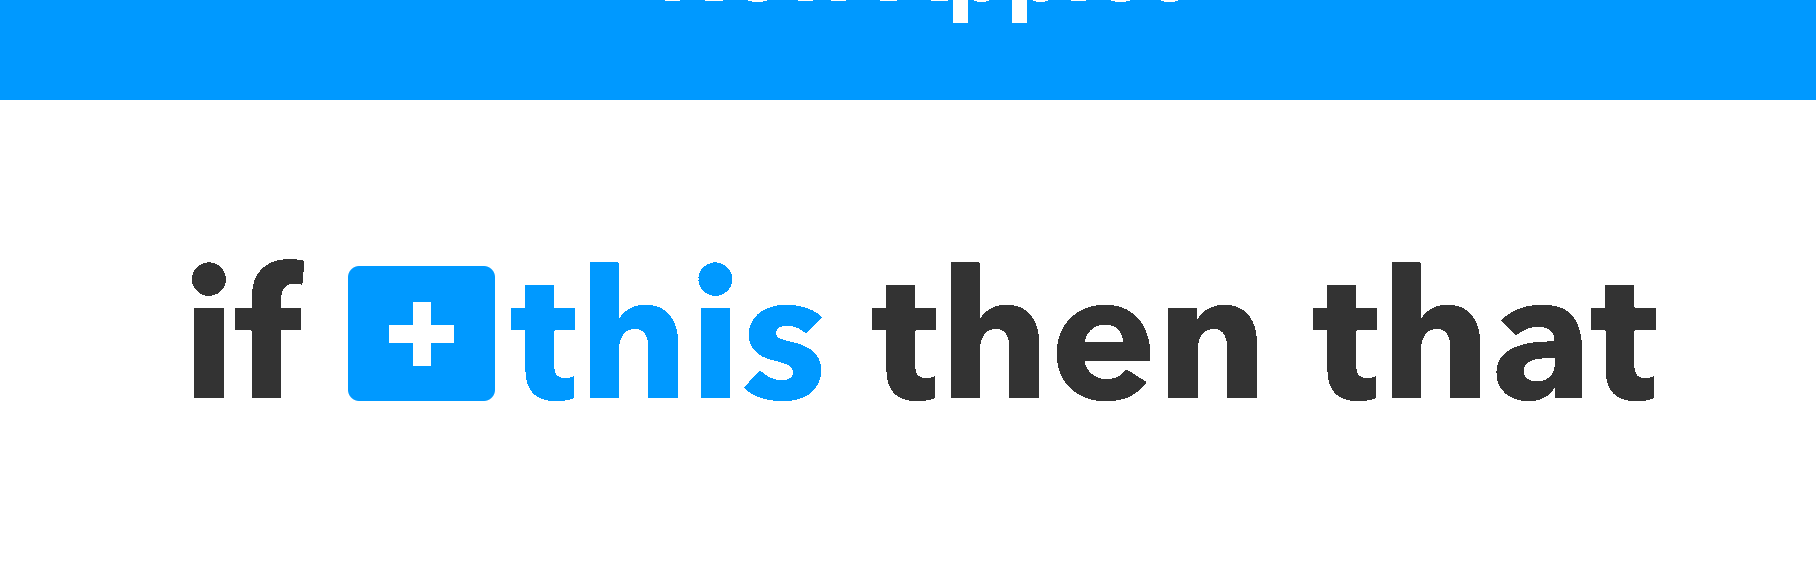 IFTTT - If this